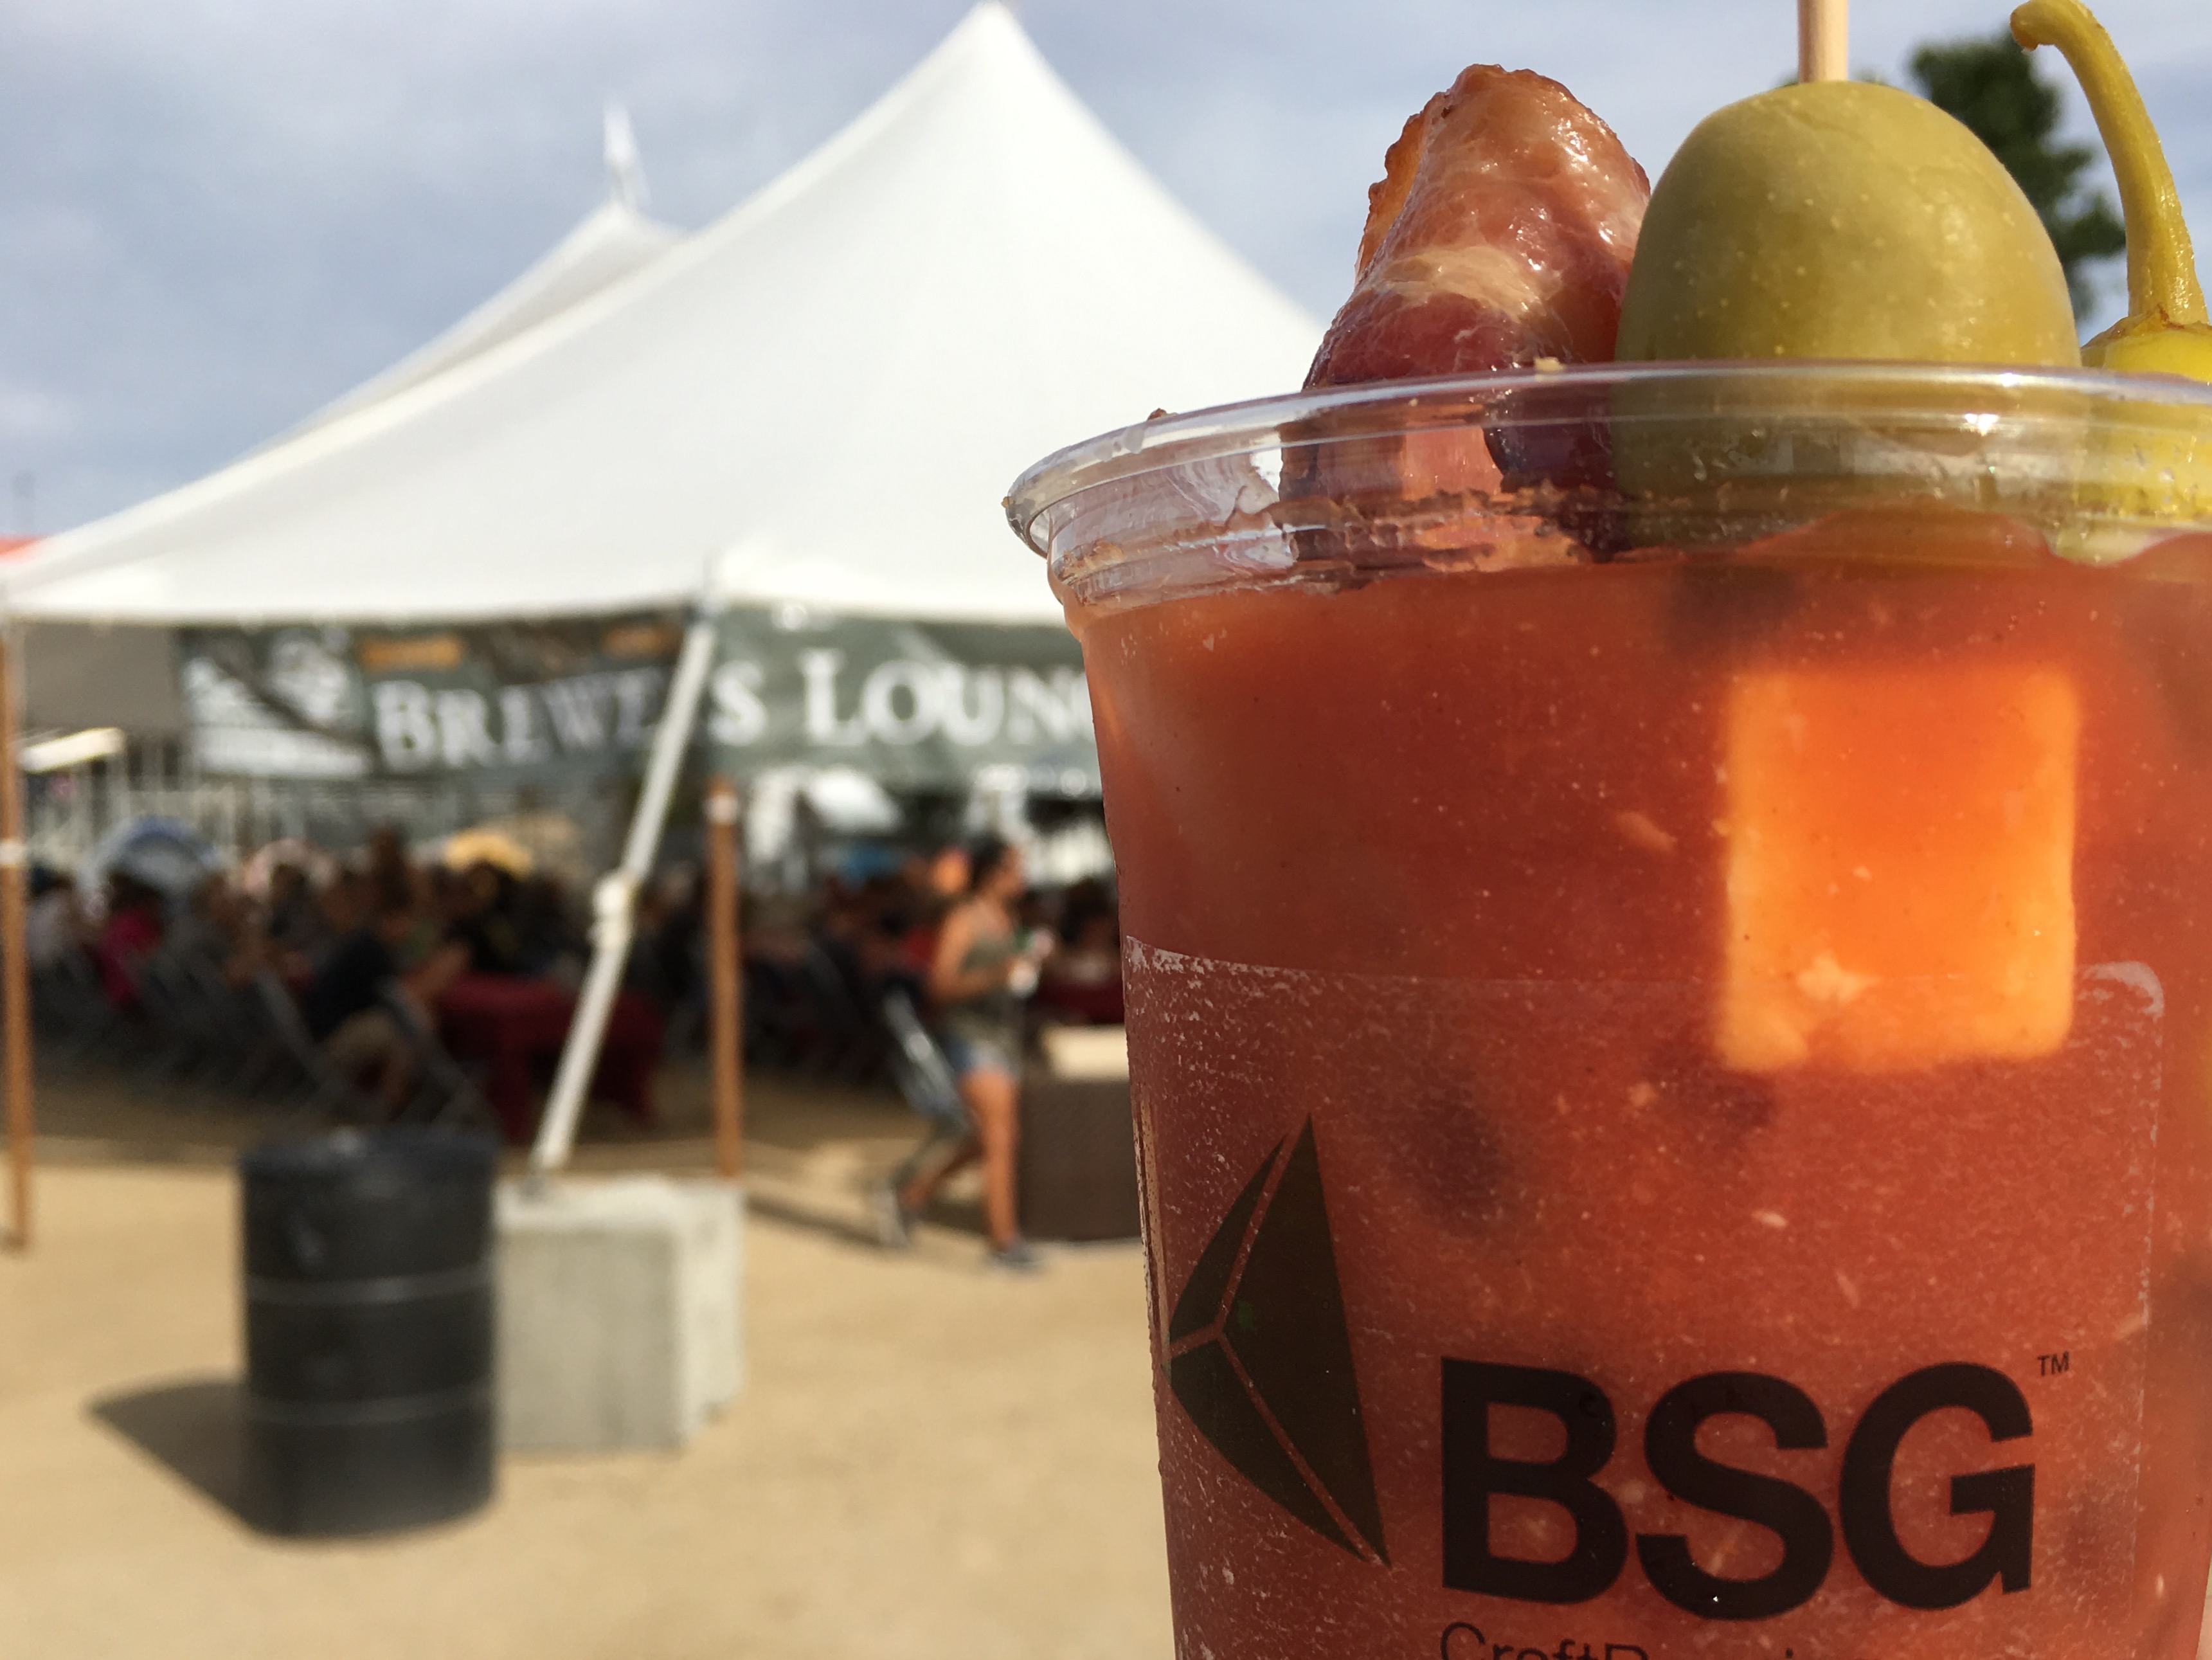 A Bloody Mary prior to Saturday's Firestone Walker Invitational Beer Fest.